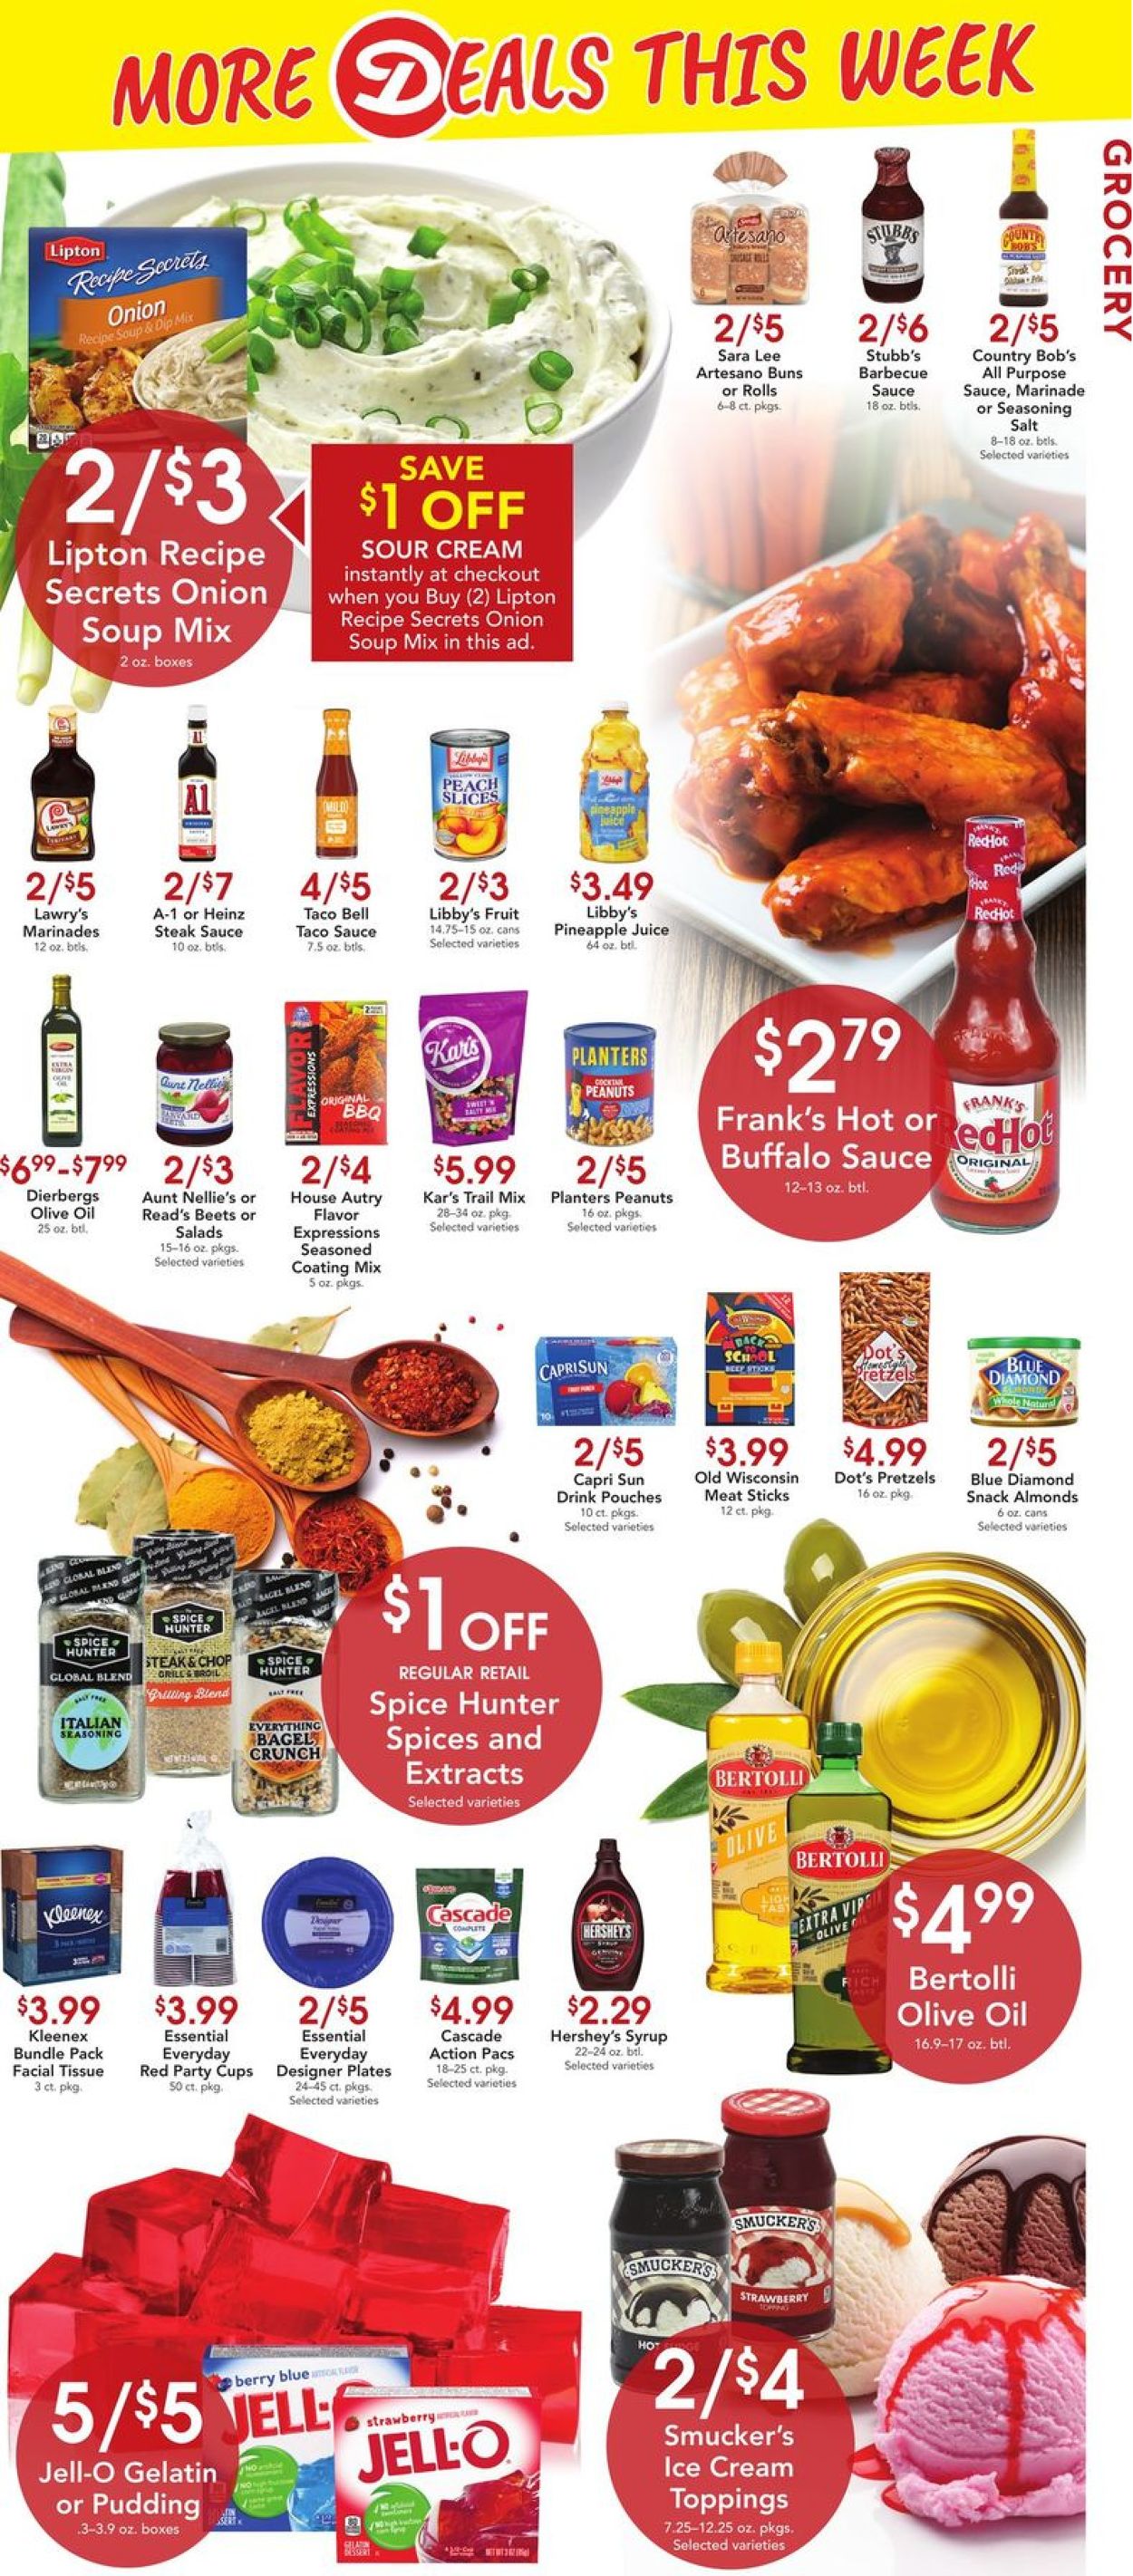 Catalogue Dierbergs from 05/25/2021